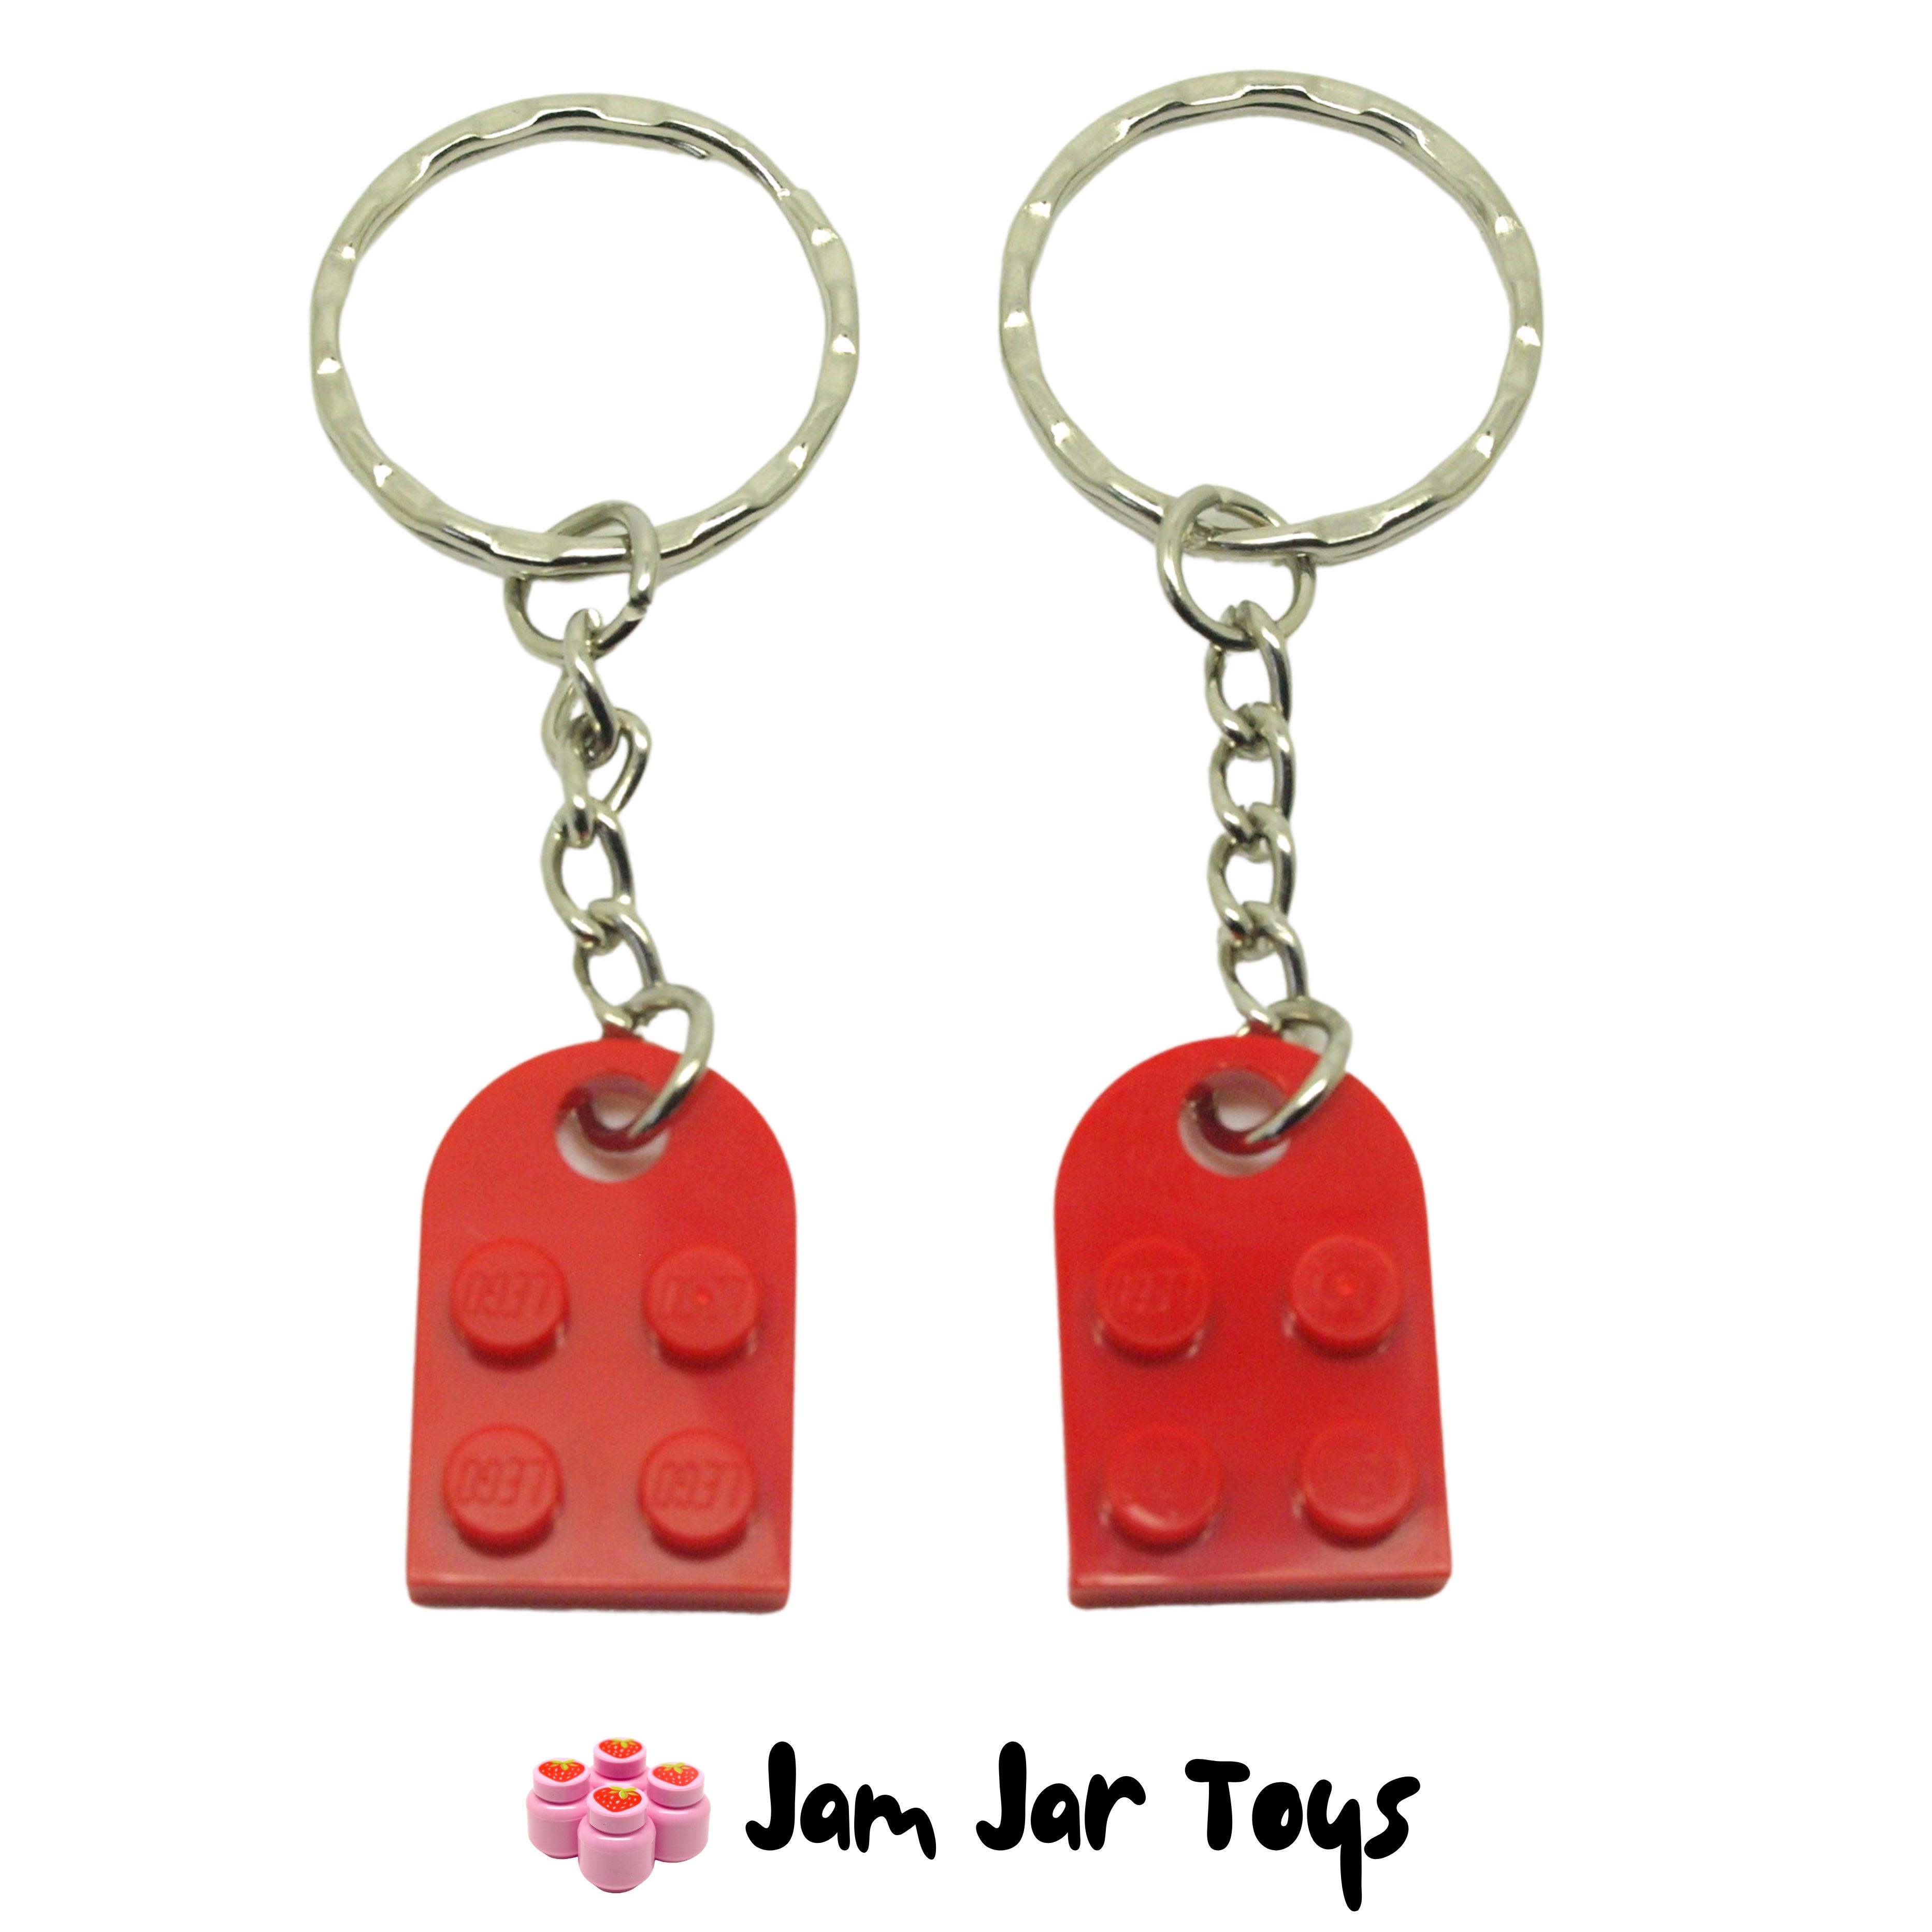 Bright Red Love Heart Keychain Keyring Valentines Present Gift Birthday Made From LEGO Parts Accessories Keychains & Lanyards Keychains 